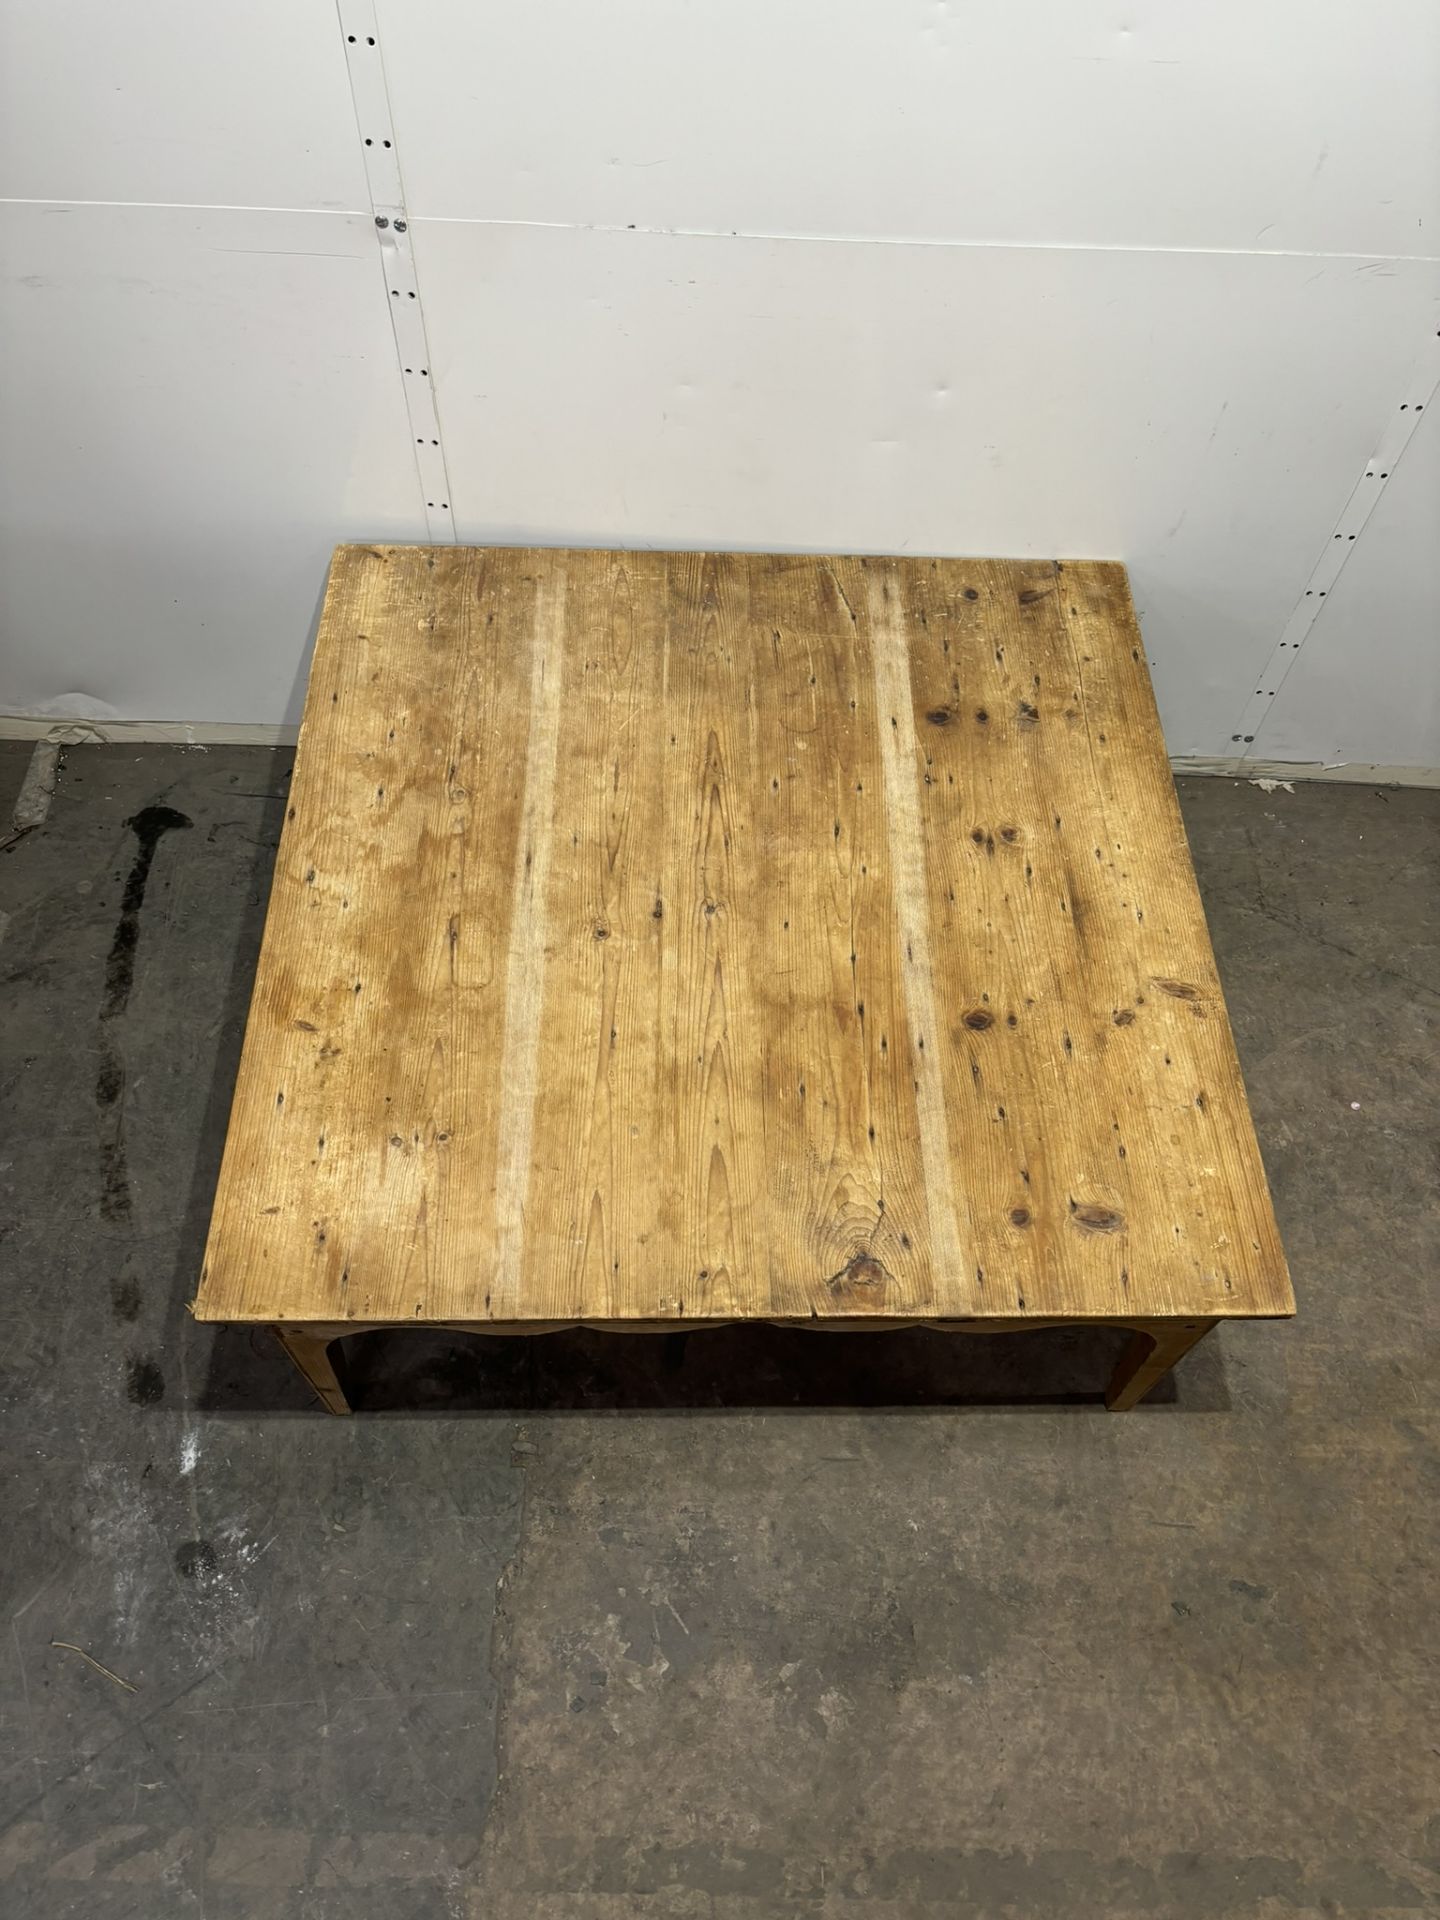 Wooden Coffee Table - Image 2 of 3